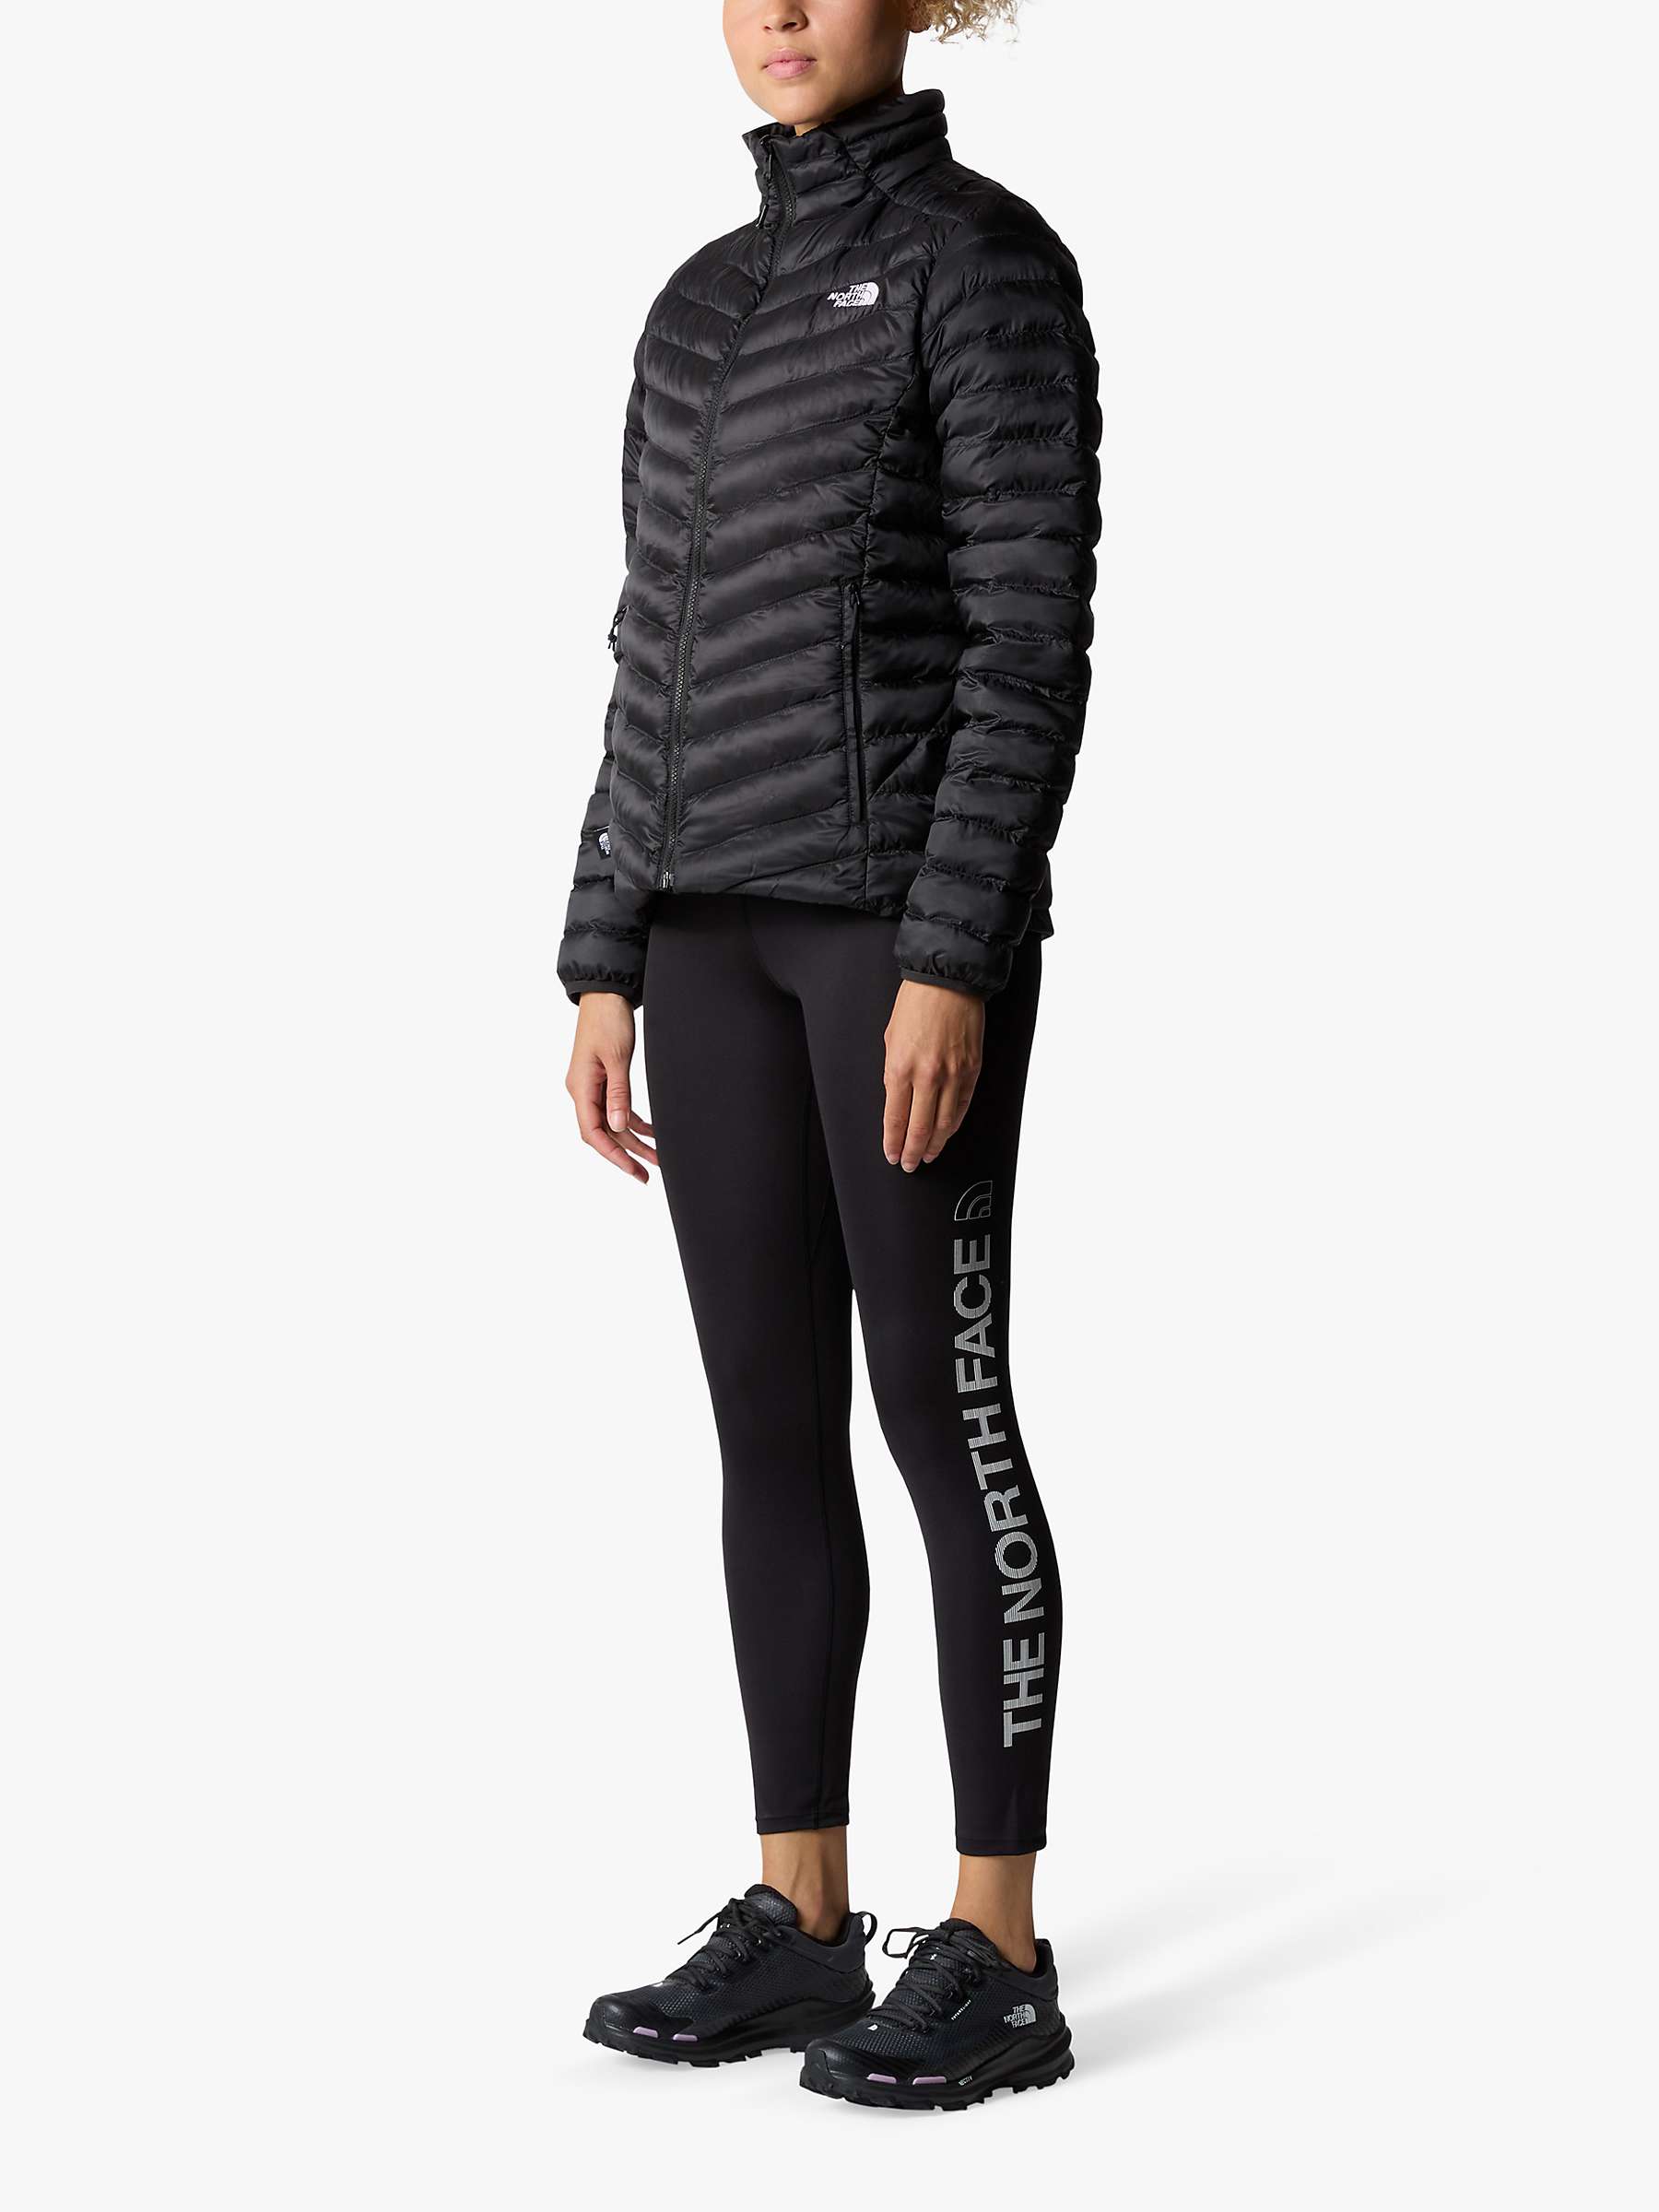 Buy The North Face Women's Huila Jacket, Tnf Black Online at johnlewis.com